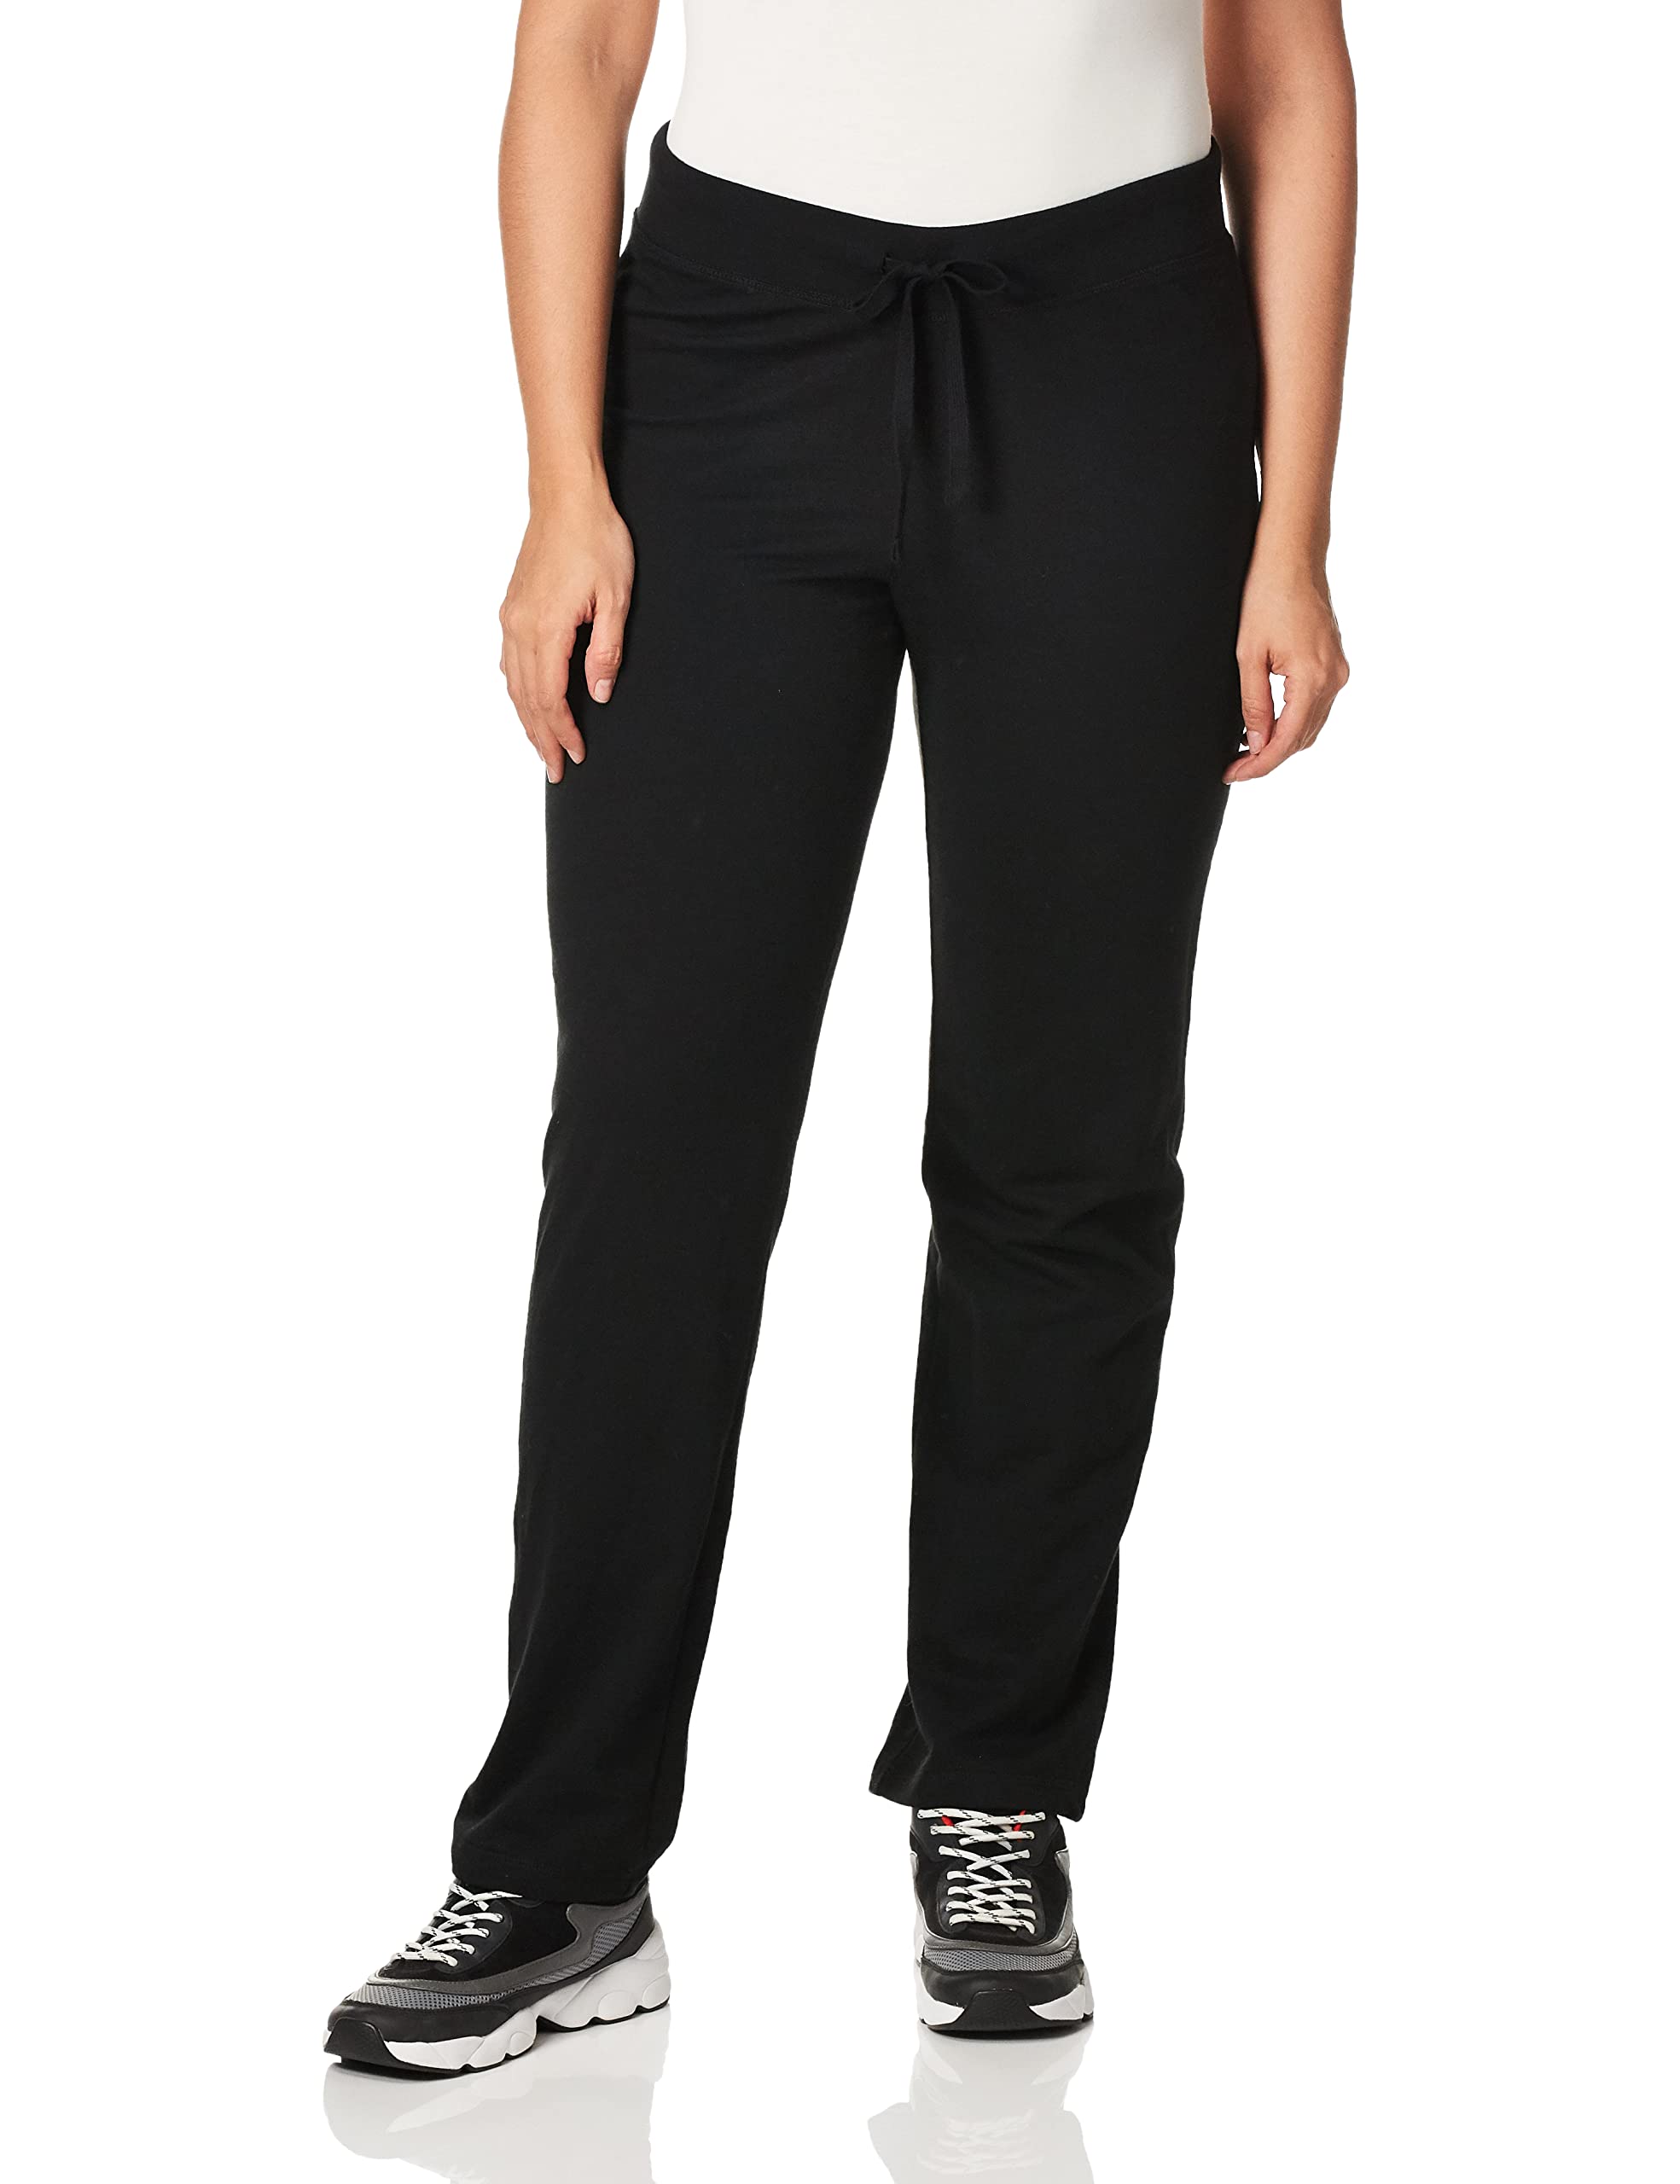 Hanes Women's French Terry Pant X-Large Black